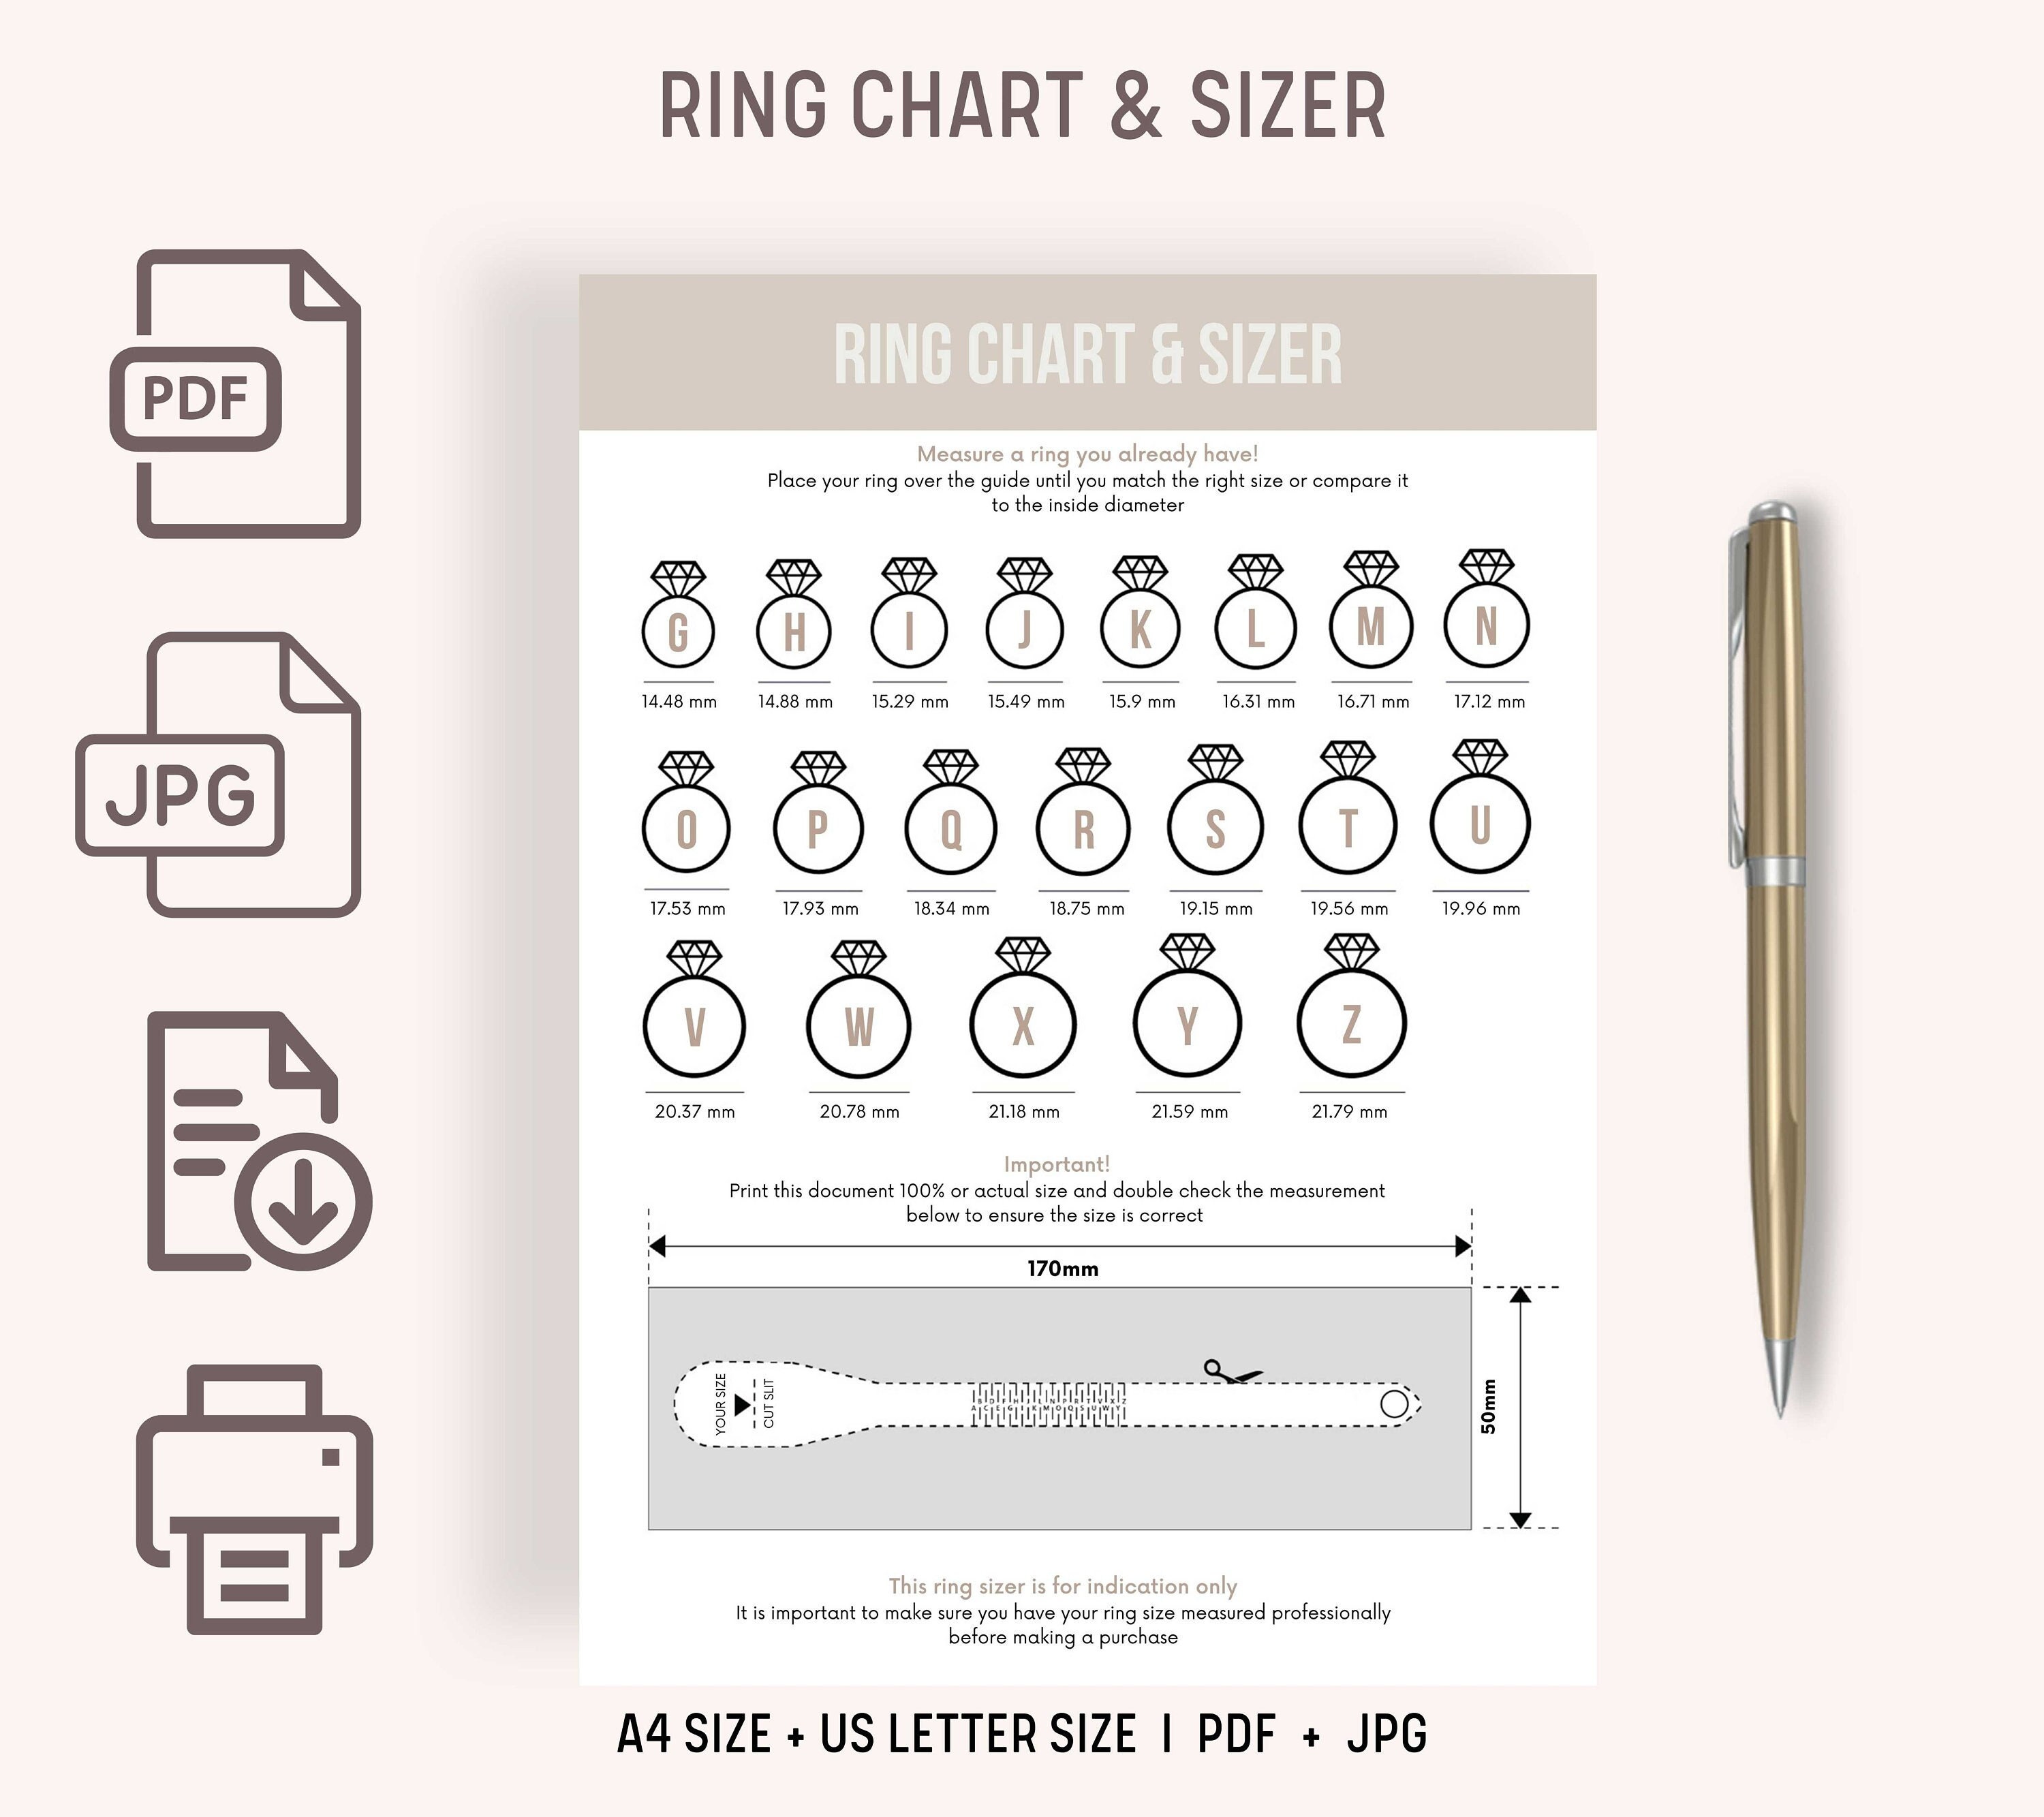 Measure Your Finger to Find Out What Ring Size You Are.here Best Way to  Determine Your Ring Size Using Paper 